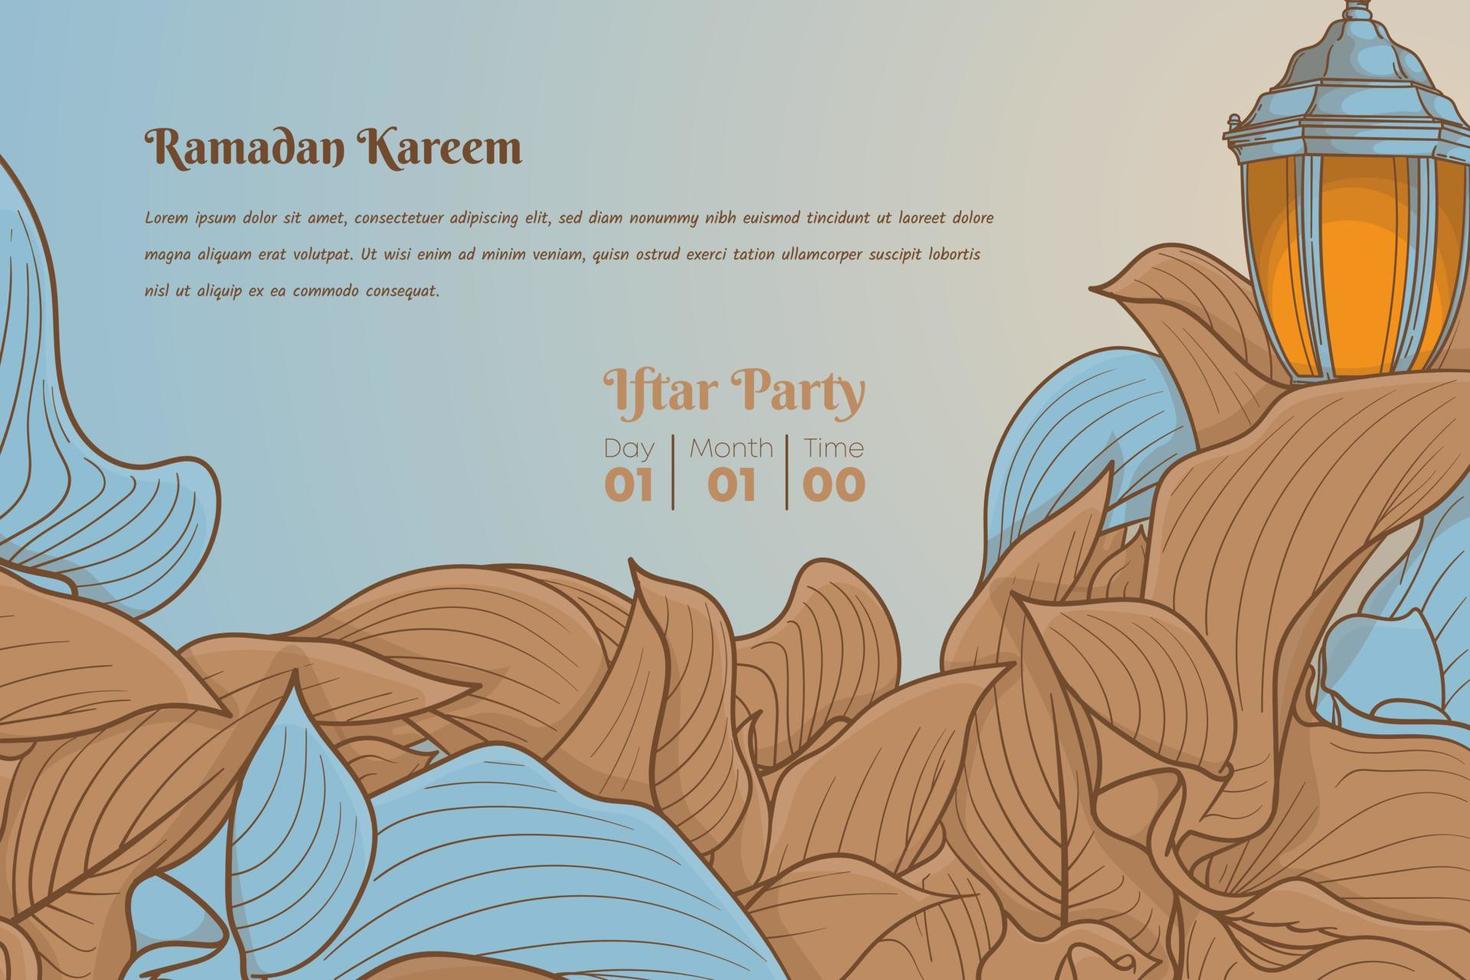 Hand drawn background design with brown leaves in cartoon design for ramadan kareem template vector